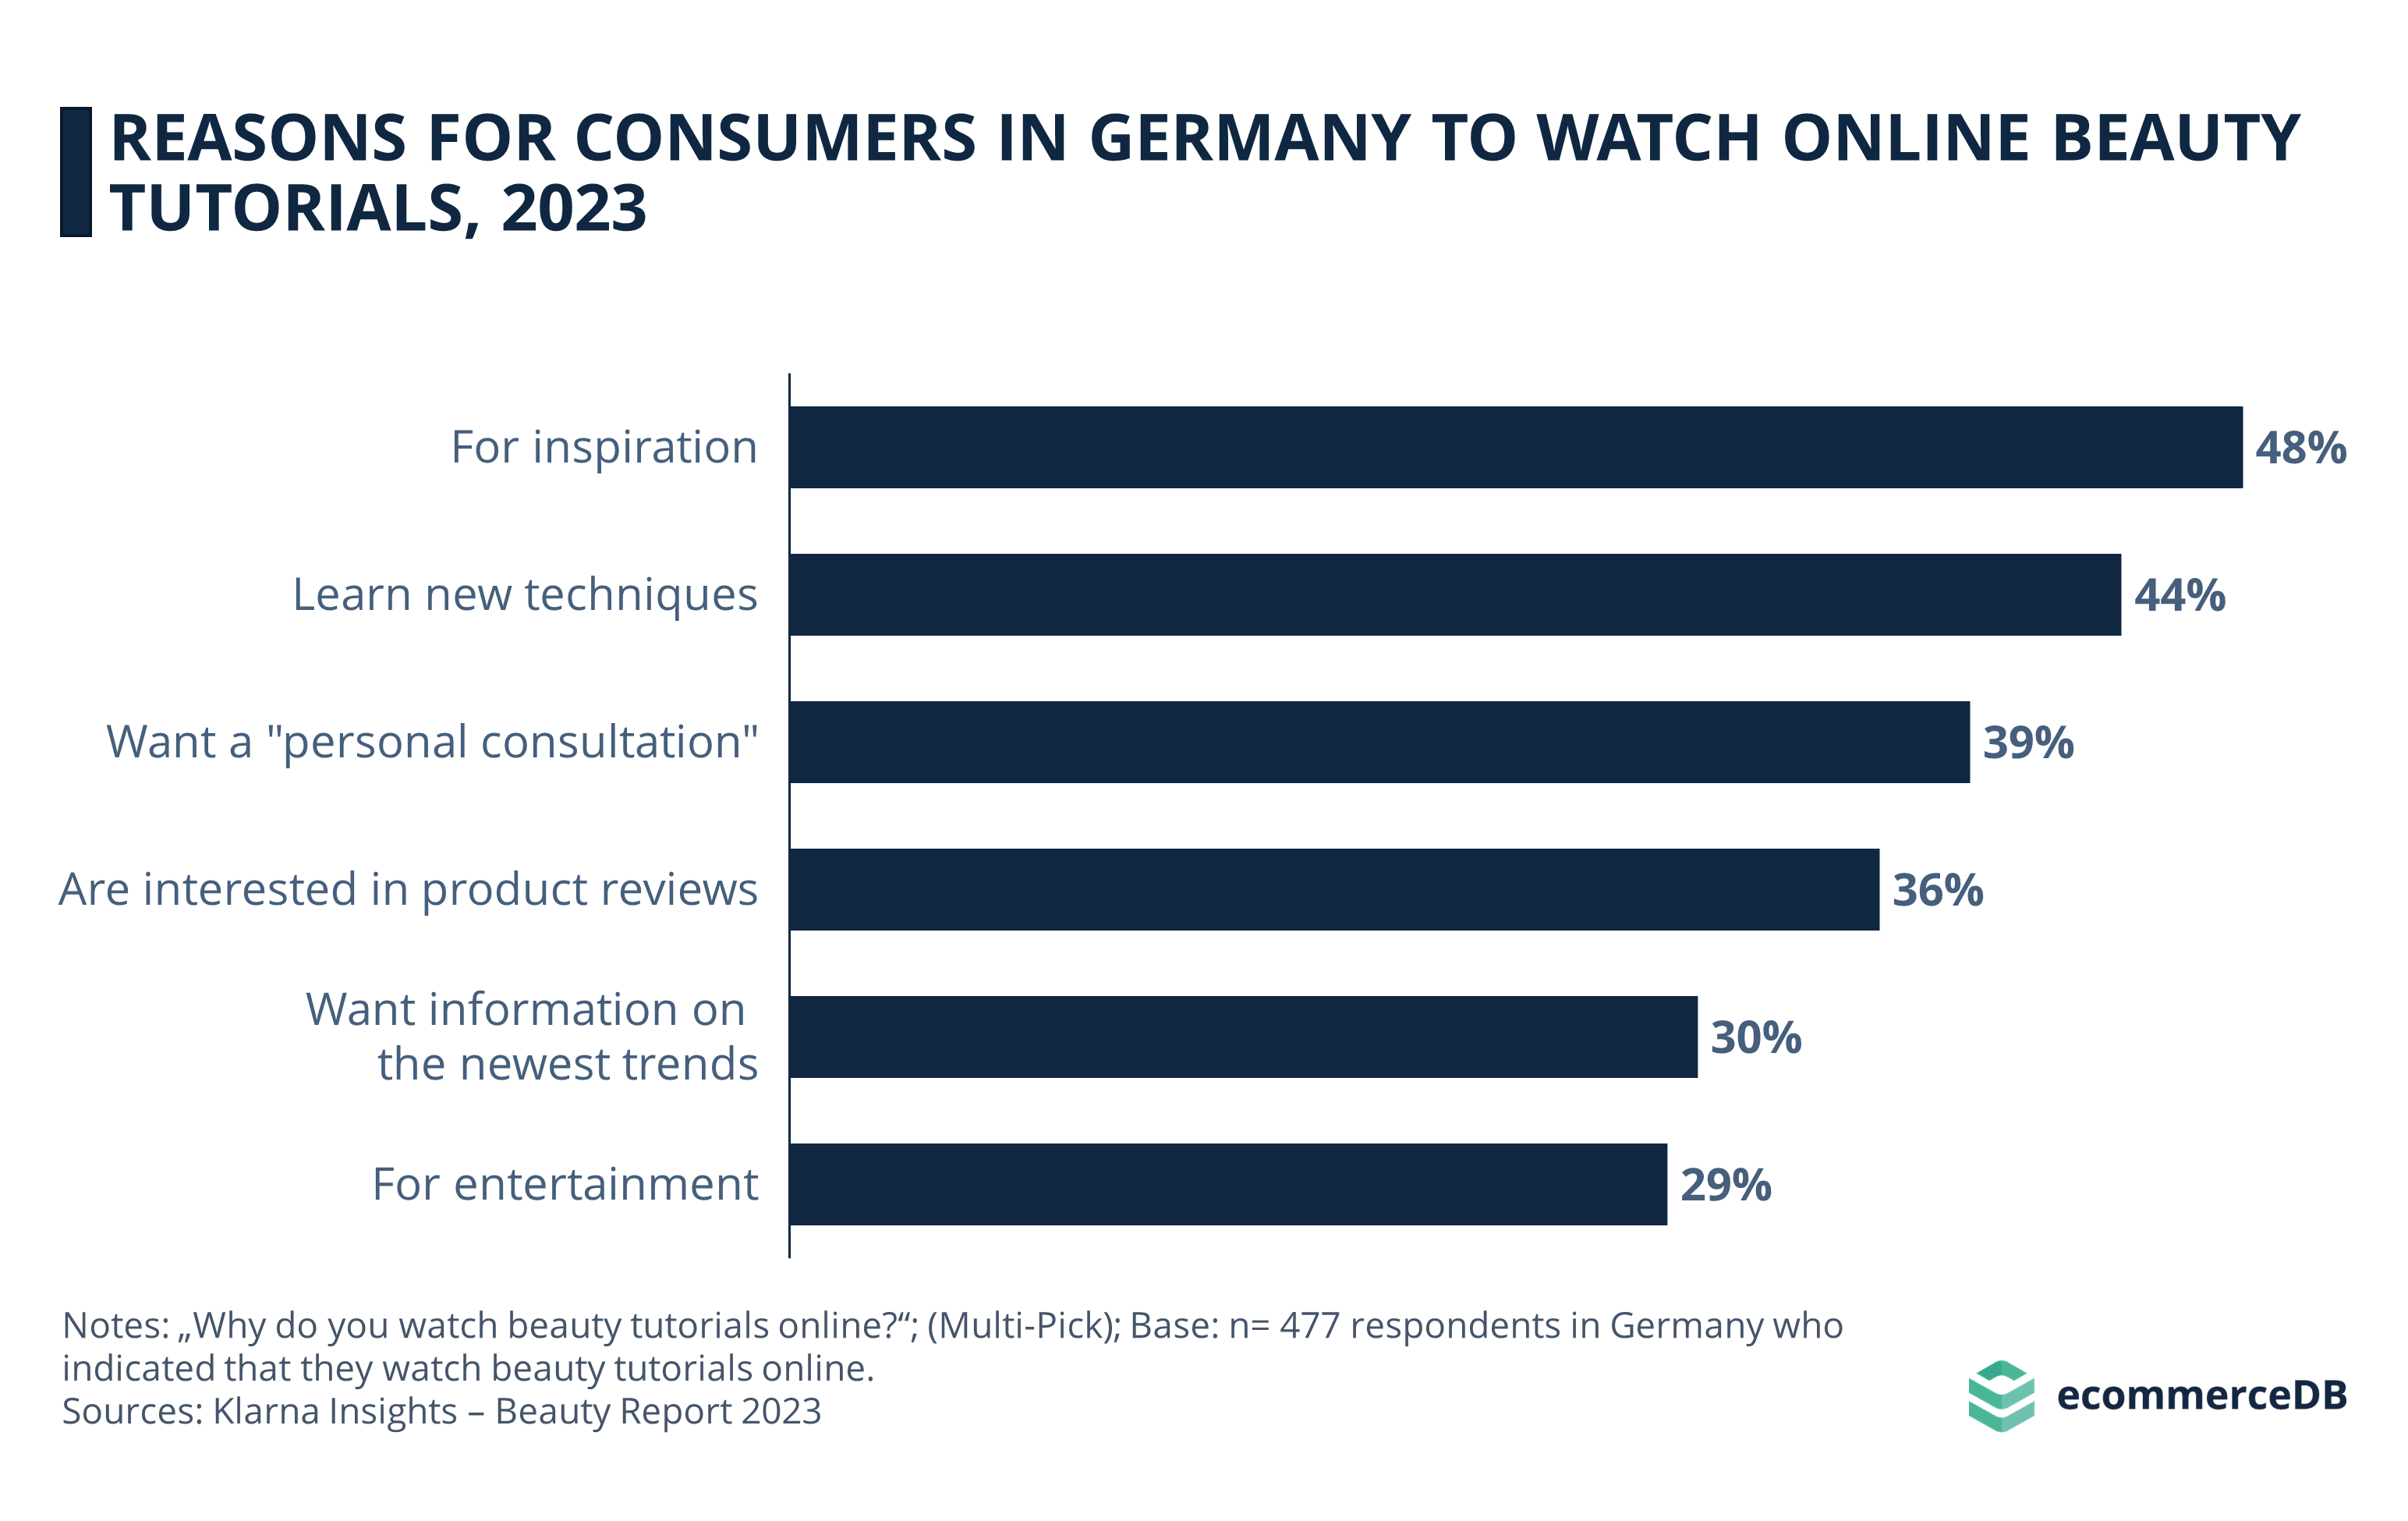 Reasons for Consumers in Germany to Watch Online Beauty Tutorials, 2023